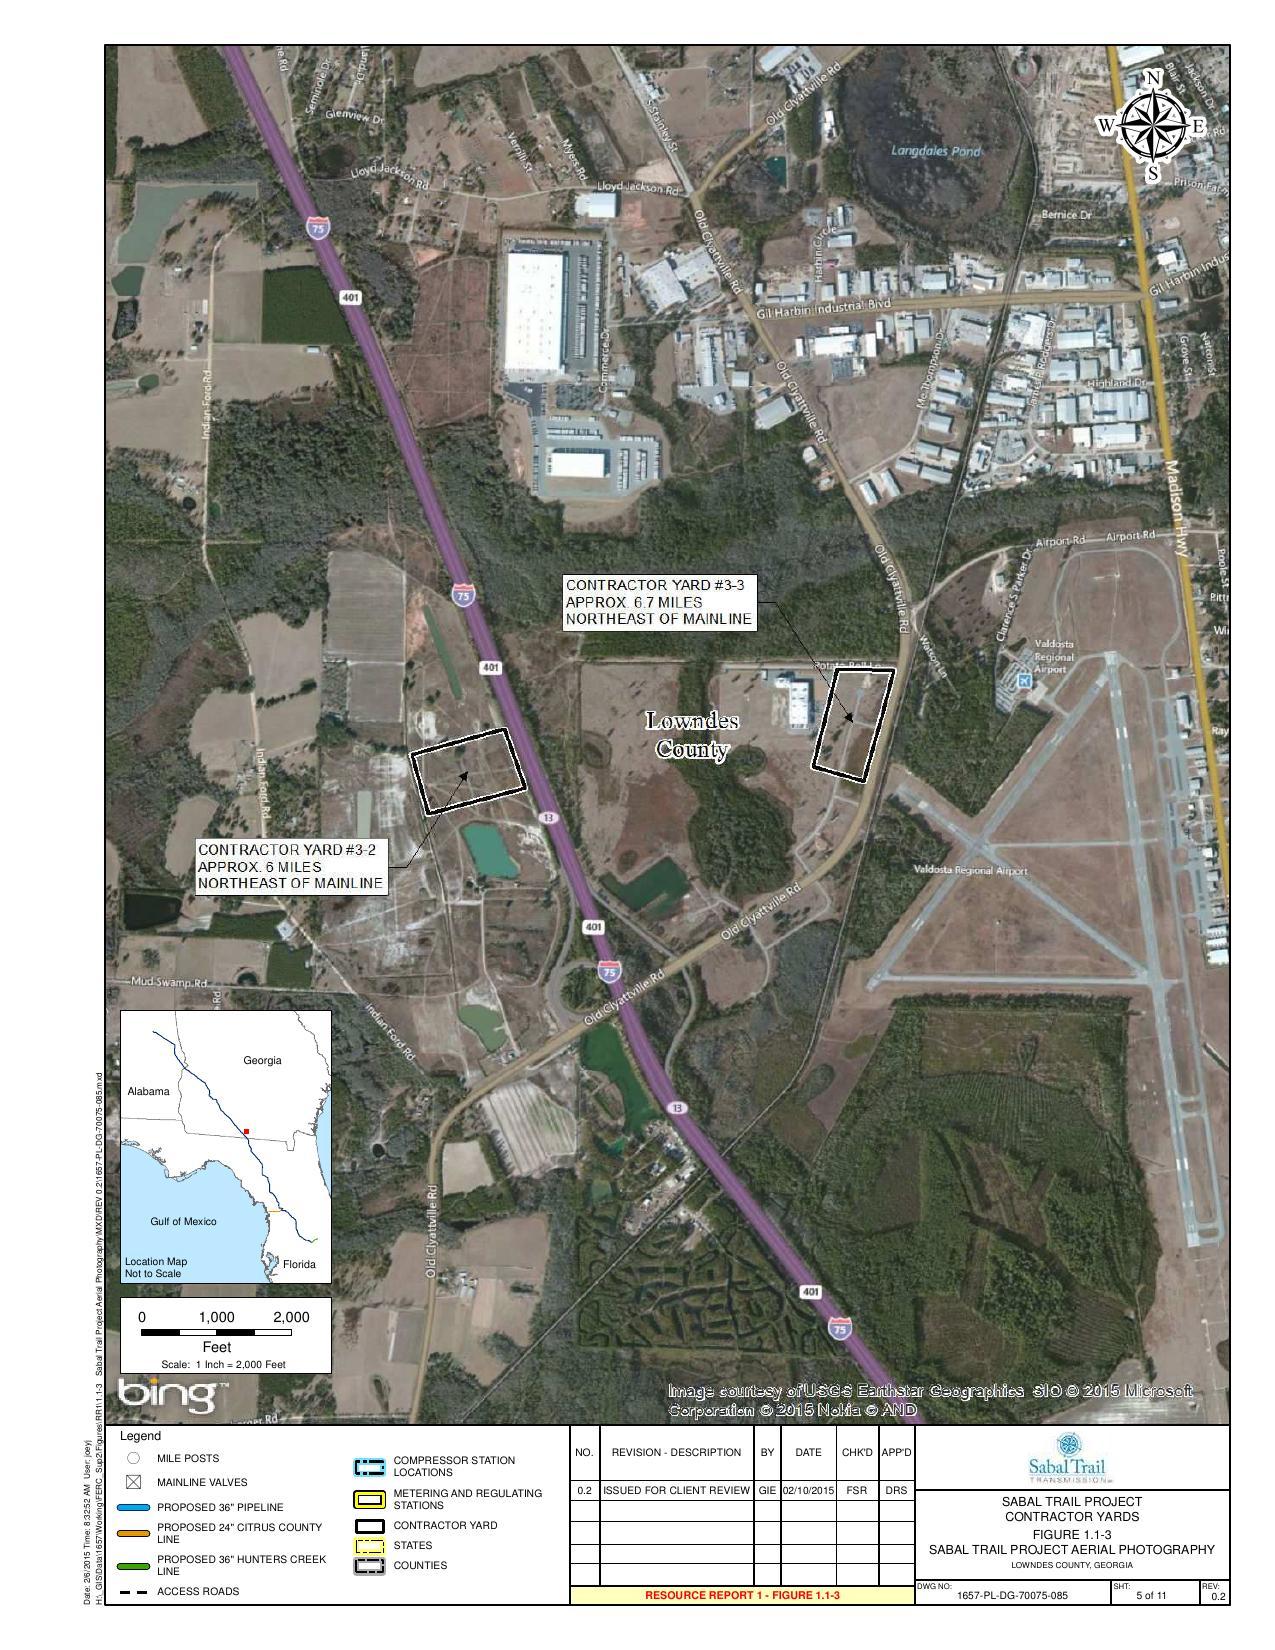 1275x1650 Lowndes County, GA, next to Valdosta Airport, in Sabal Trail Contractor Yards aerial maps, by John S. Quarterman, for SpectraBusters.org, 20 February 2015